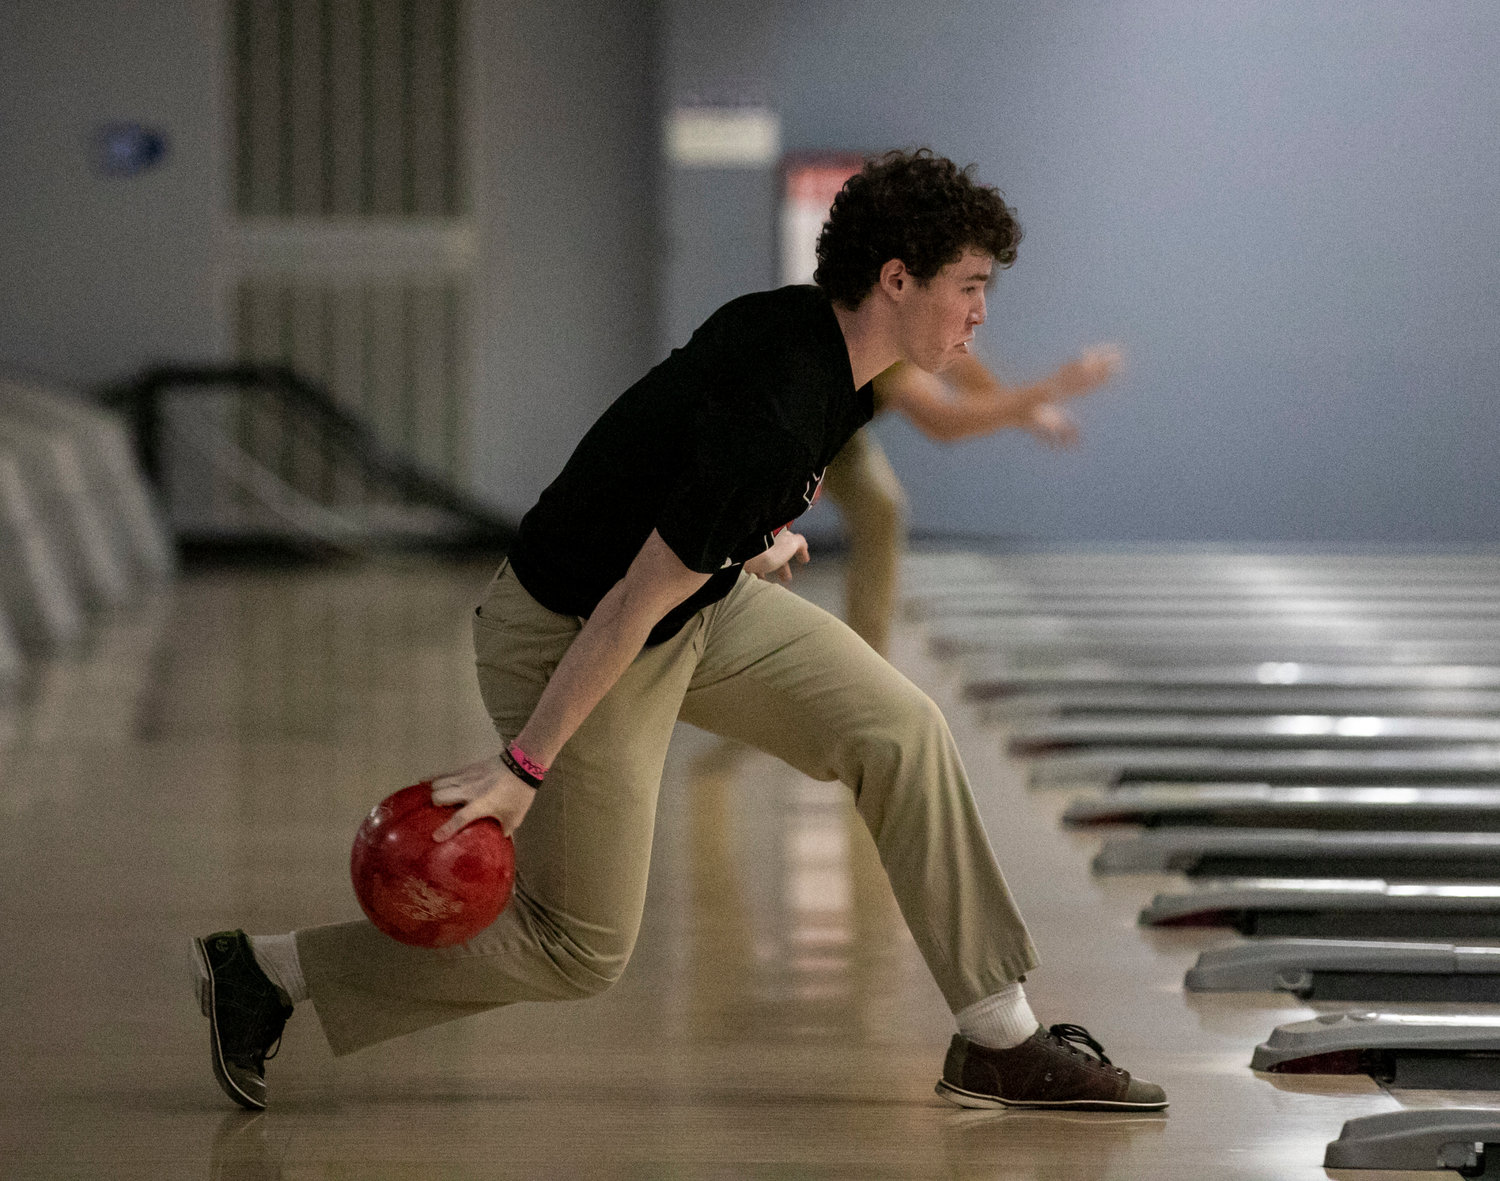 Spanish Fort sophomore Cameron Lytle loads a shot in the qualifying round of action during the South Regional bowling tournament Thursday, Jan. 19, at Eastern Shore Lanes. Lytle helped the Toros finish as regional semifinalists to move on to the state tournament next week.